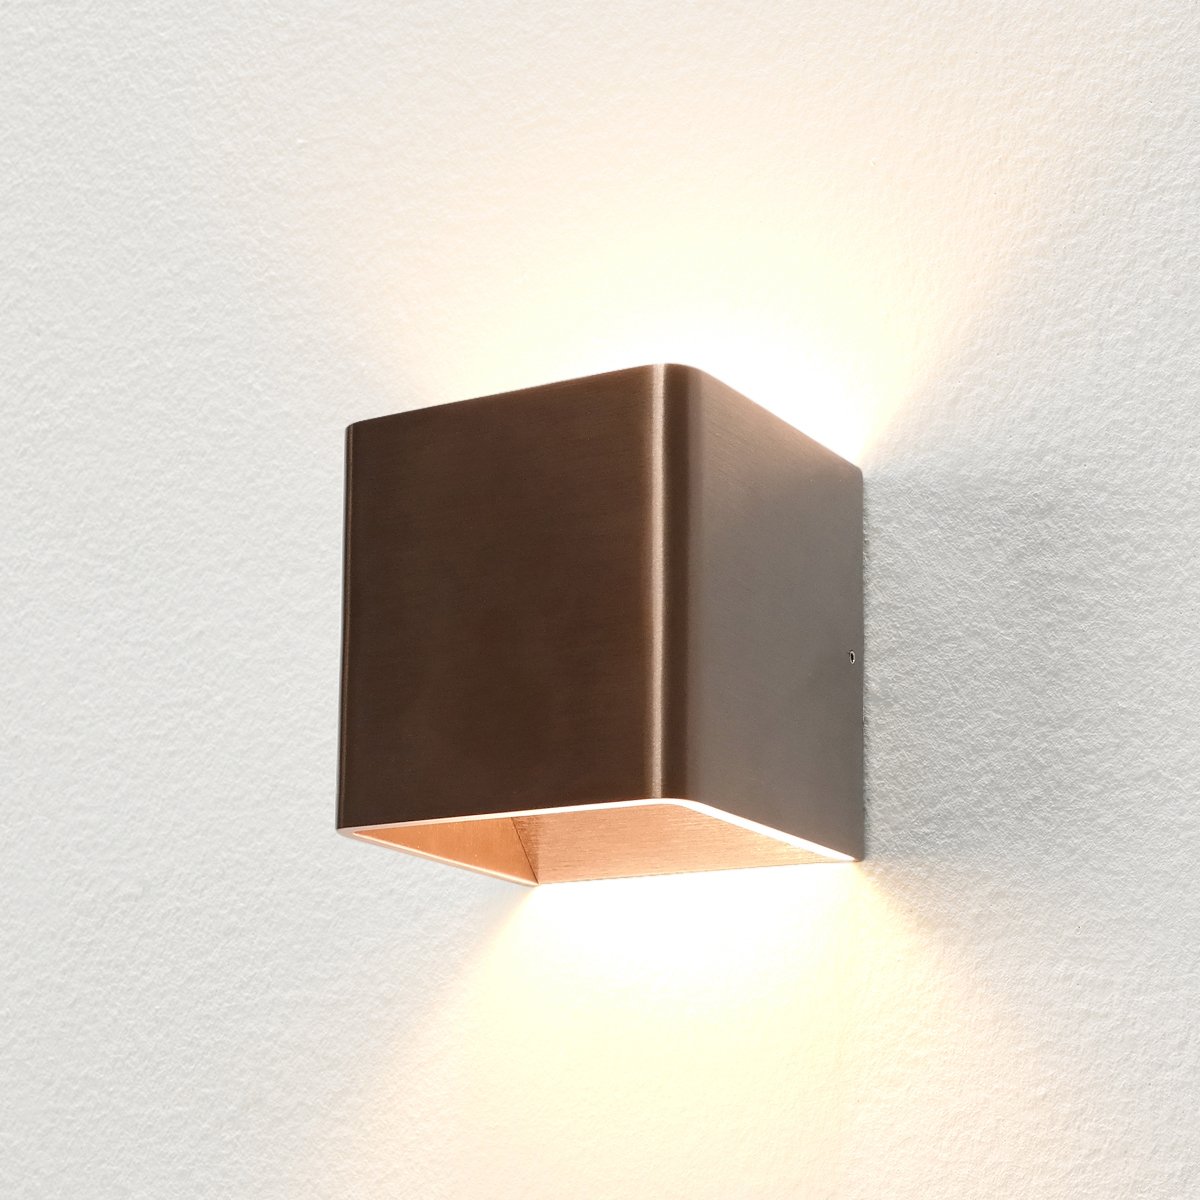 Muurverlichting Wandlamp led up down brons Carré - 10 cm